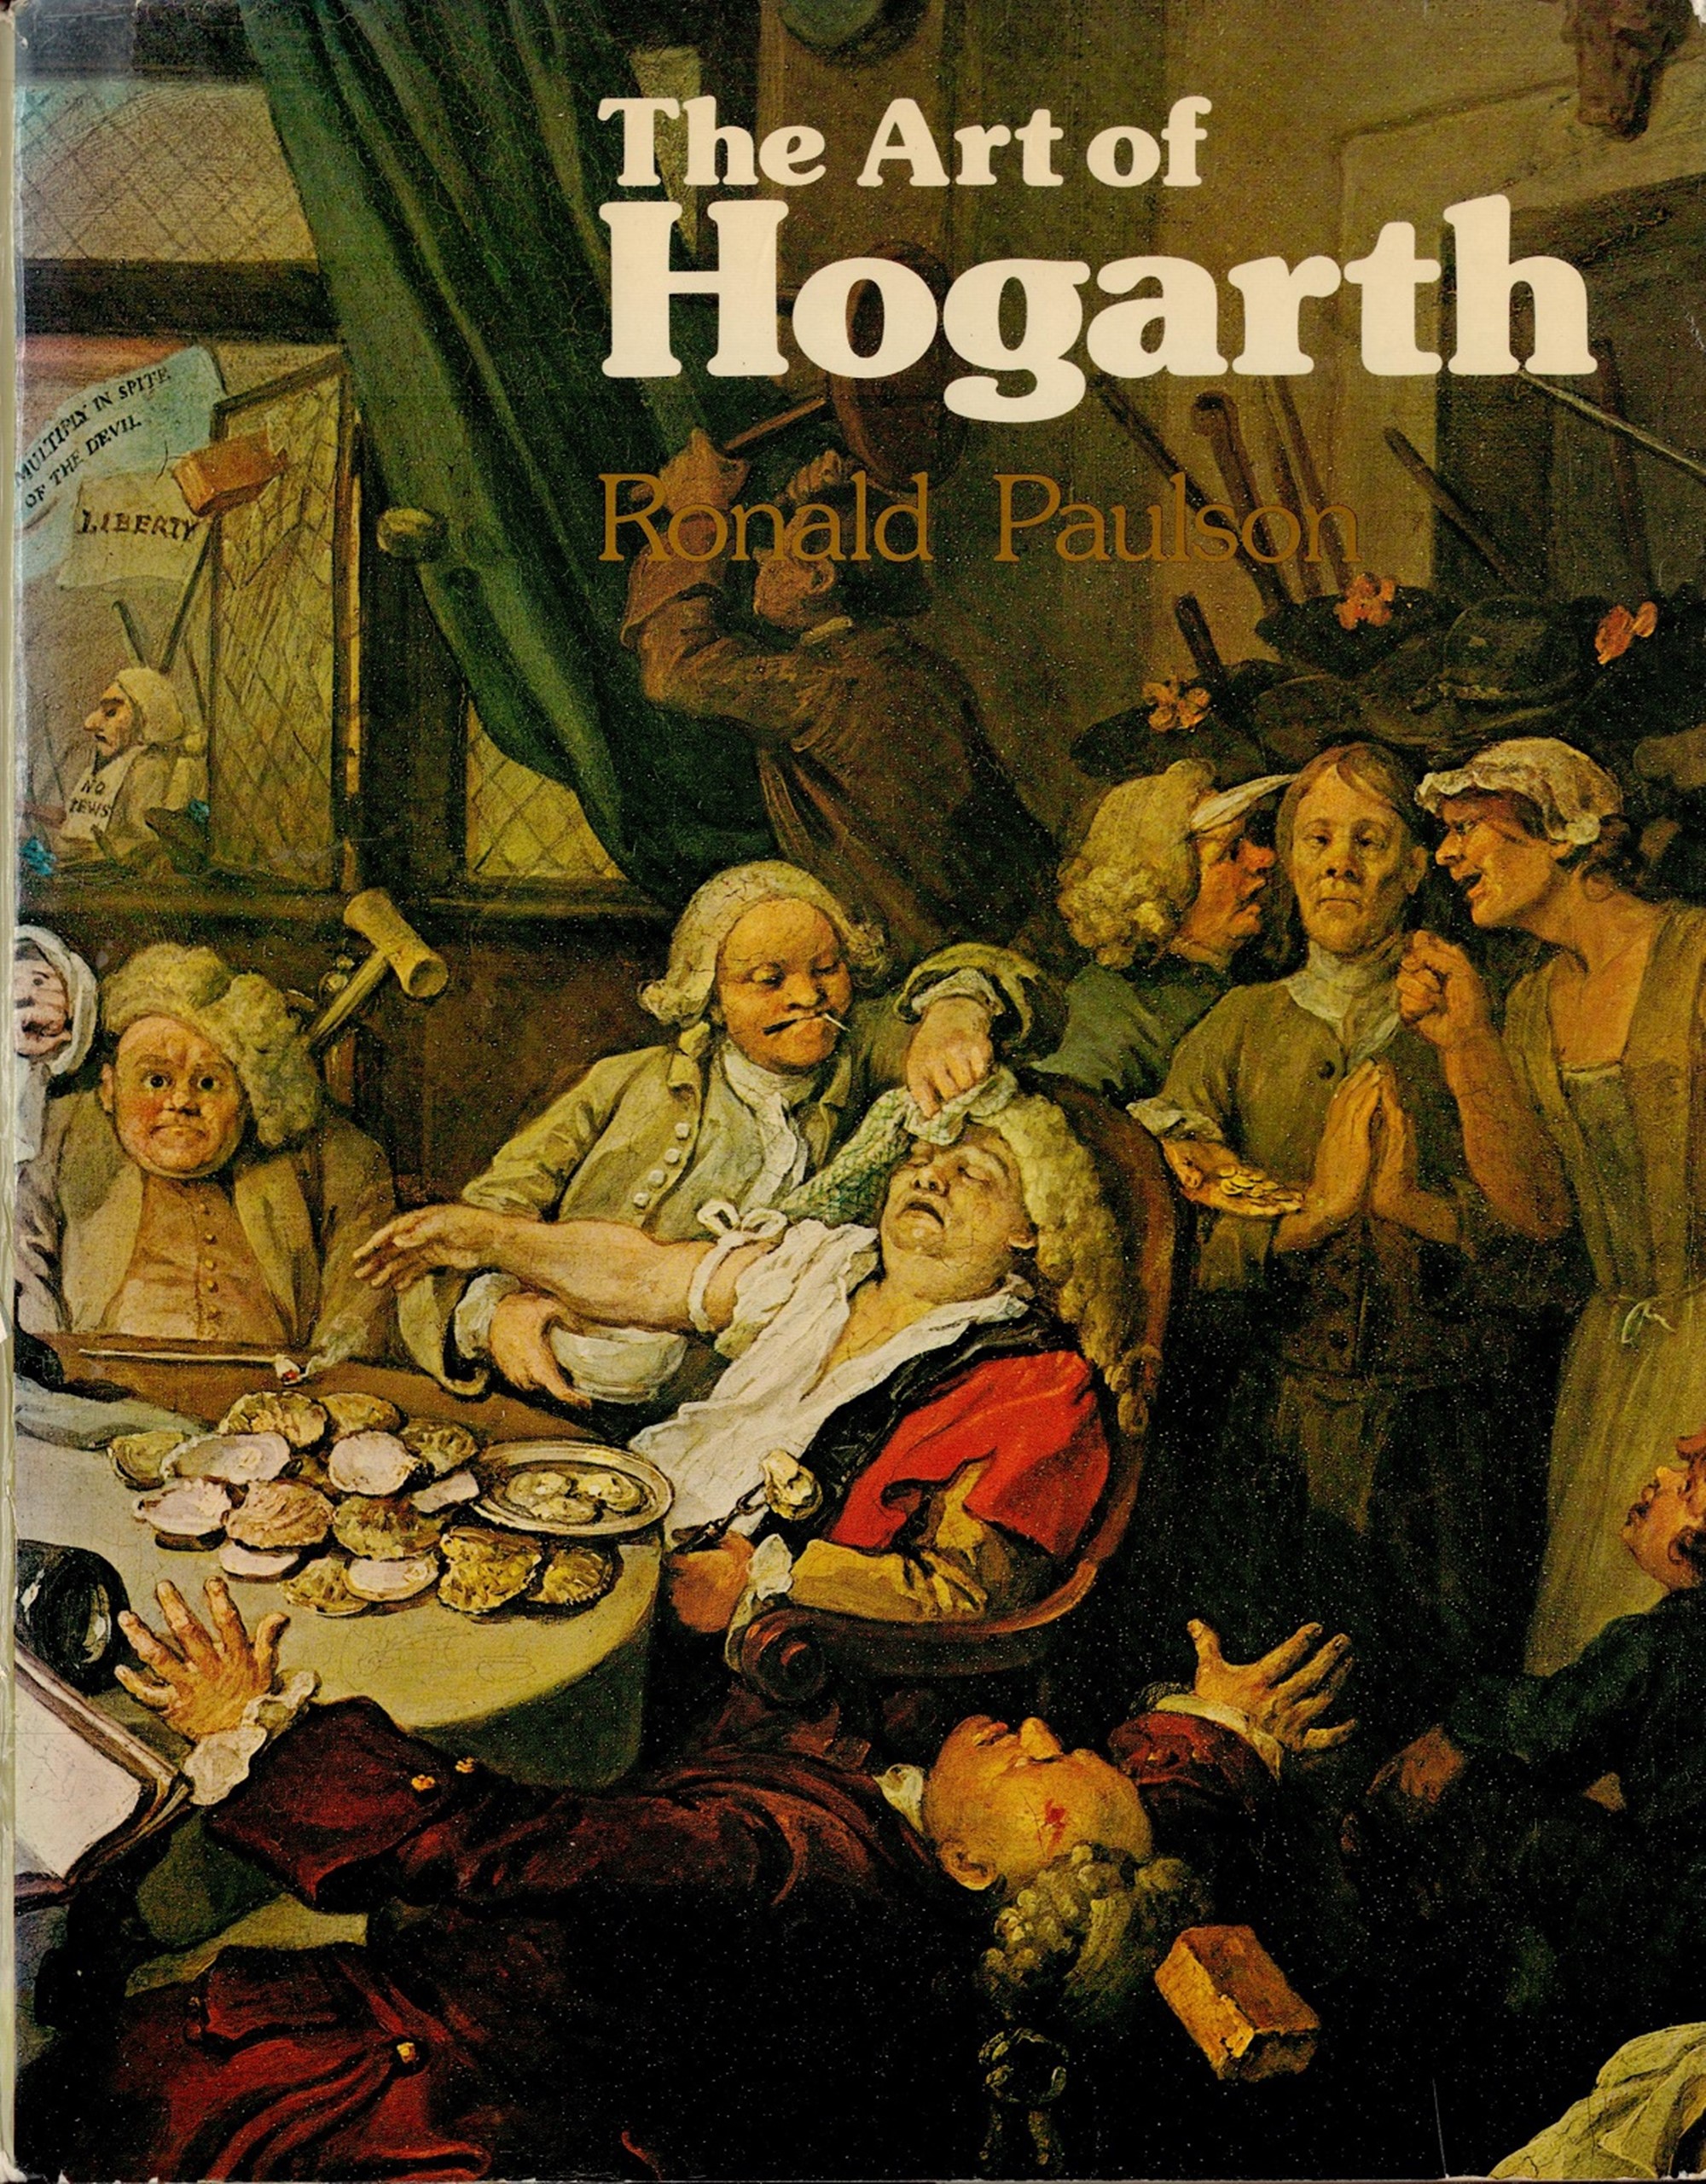 The Art of Hogarth by Ronald Paulson First Edition 1975 Hardback Book published by Phaidon Press Ltd - Image 2 of 6